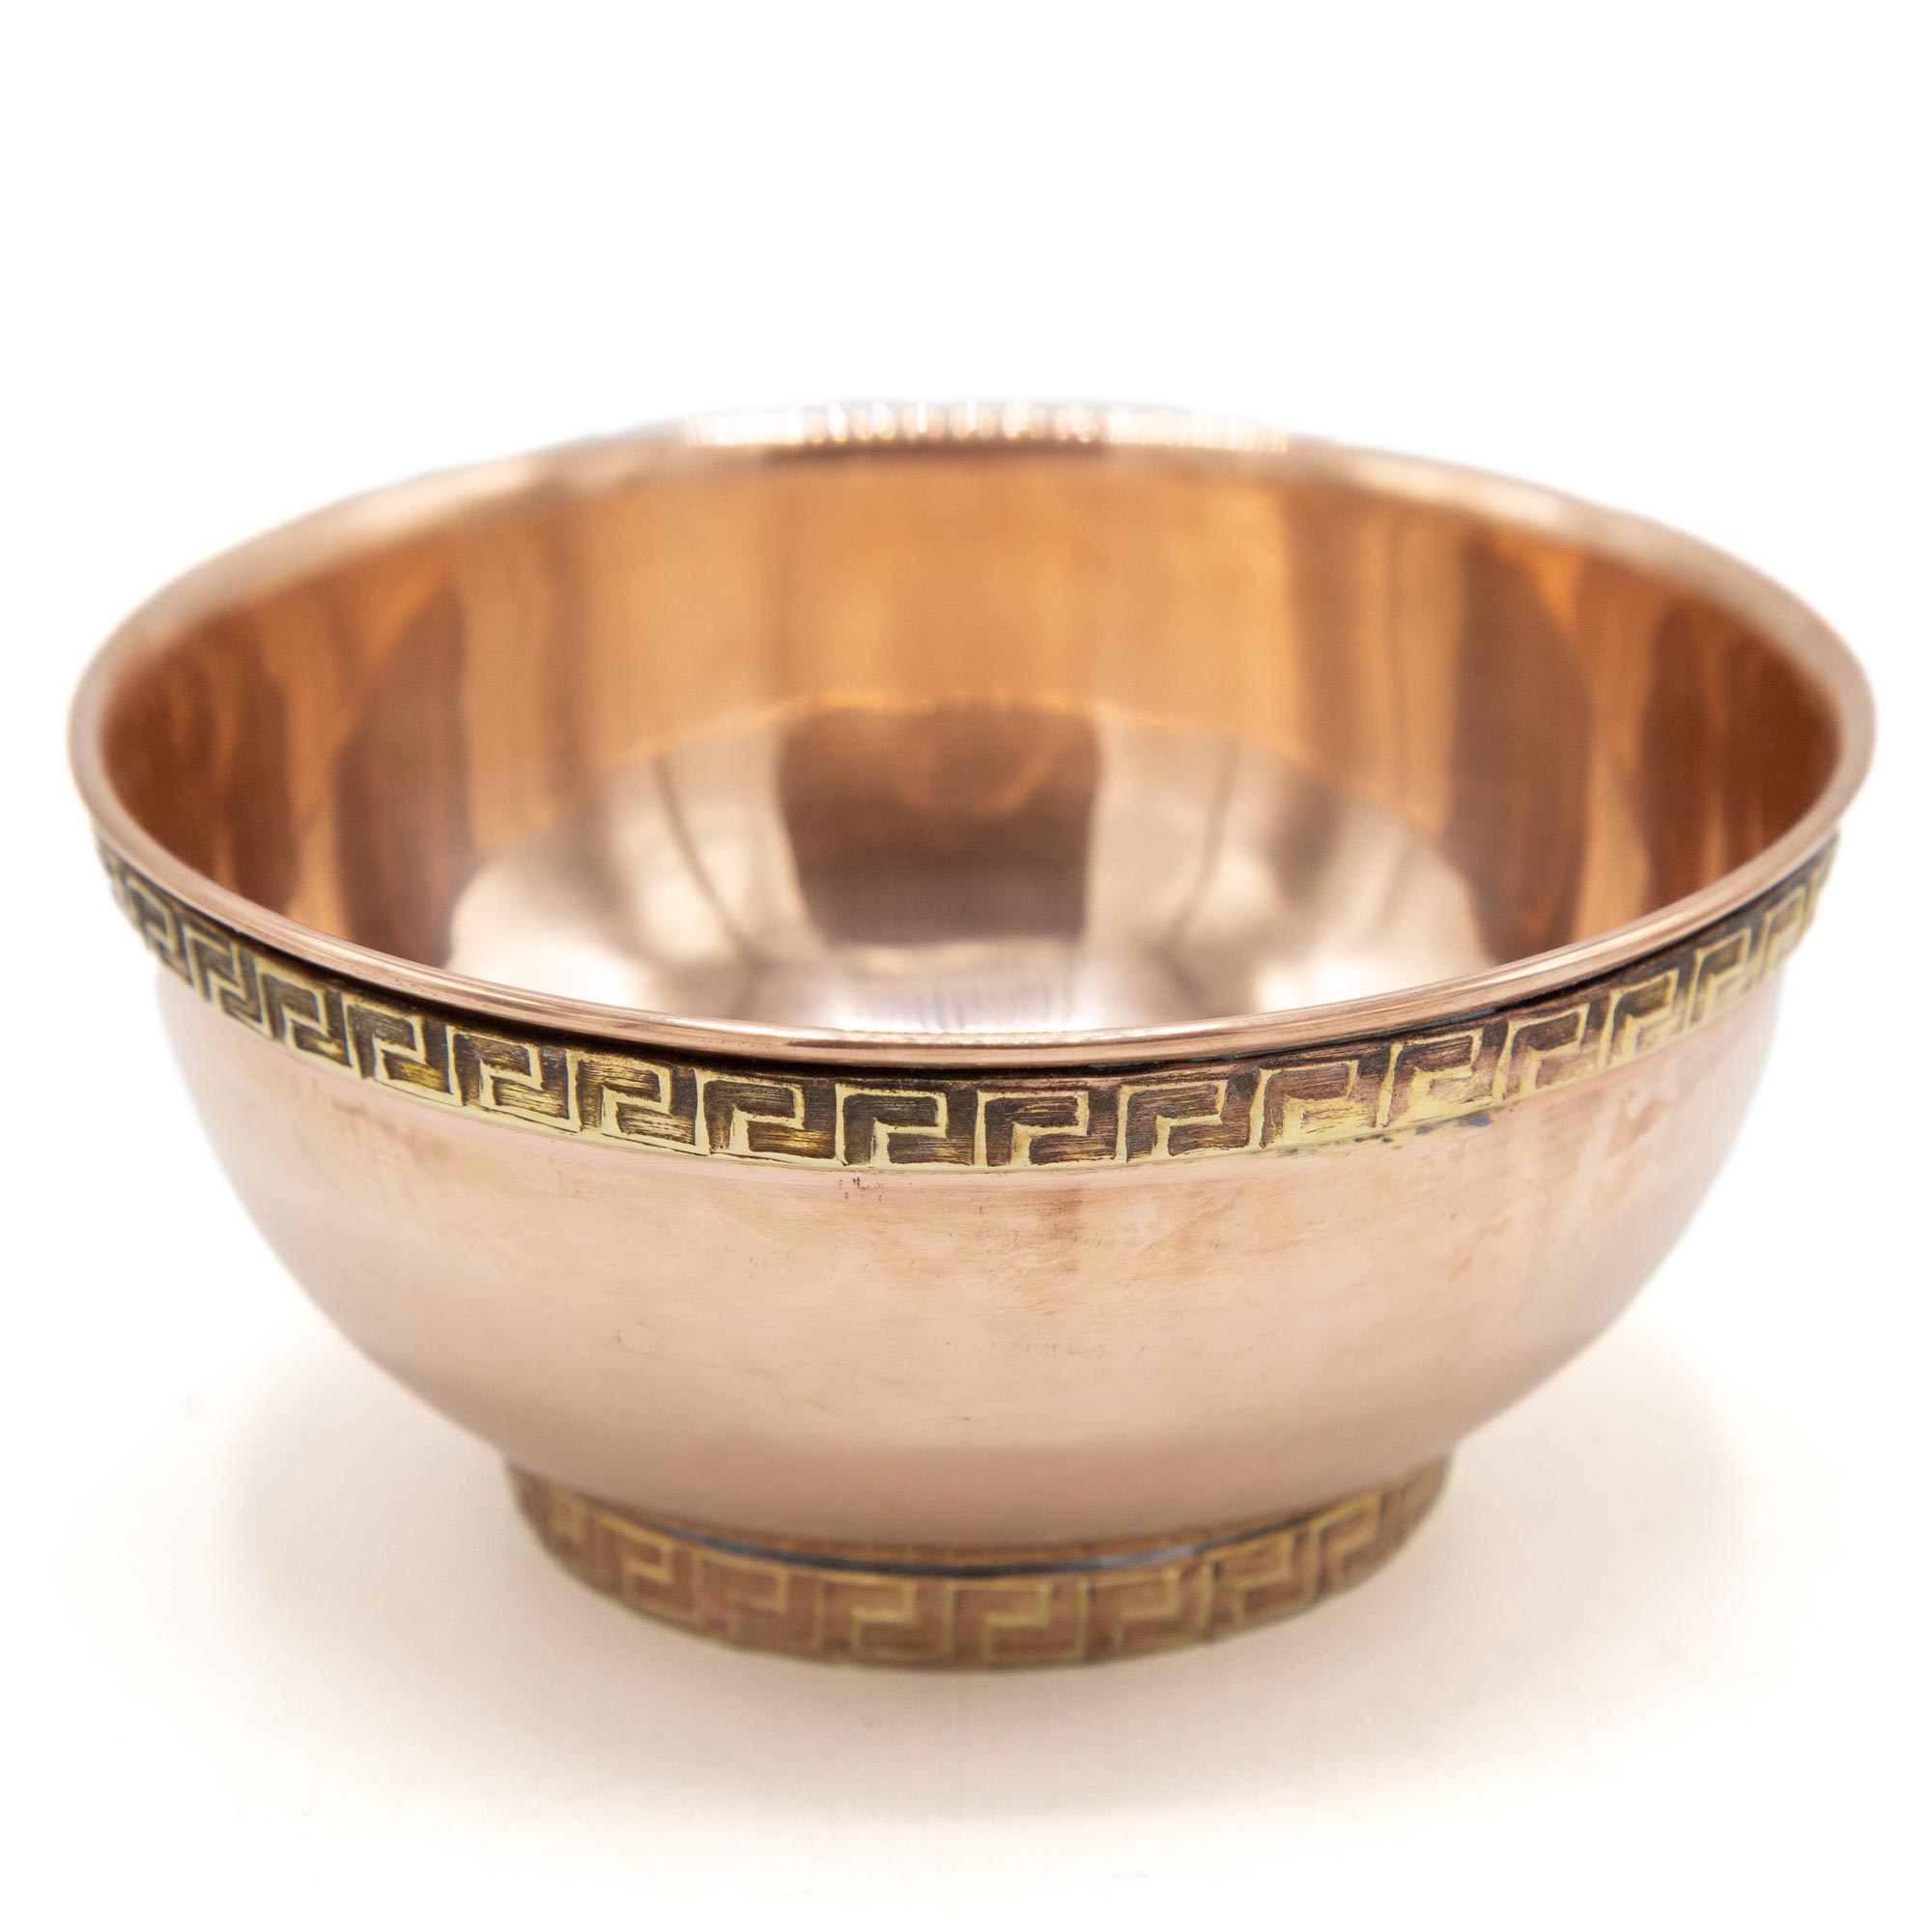 Copper and Brass Offering Bowls - 4.25